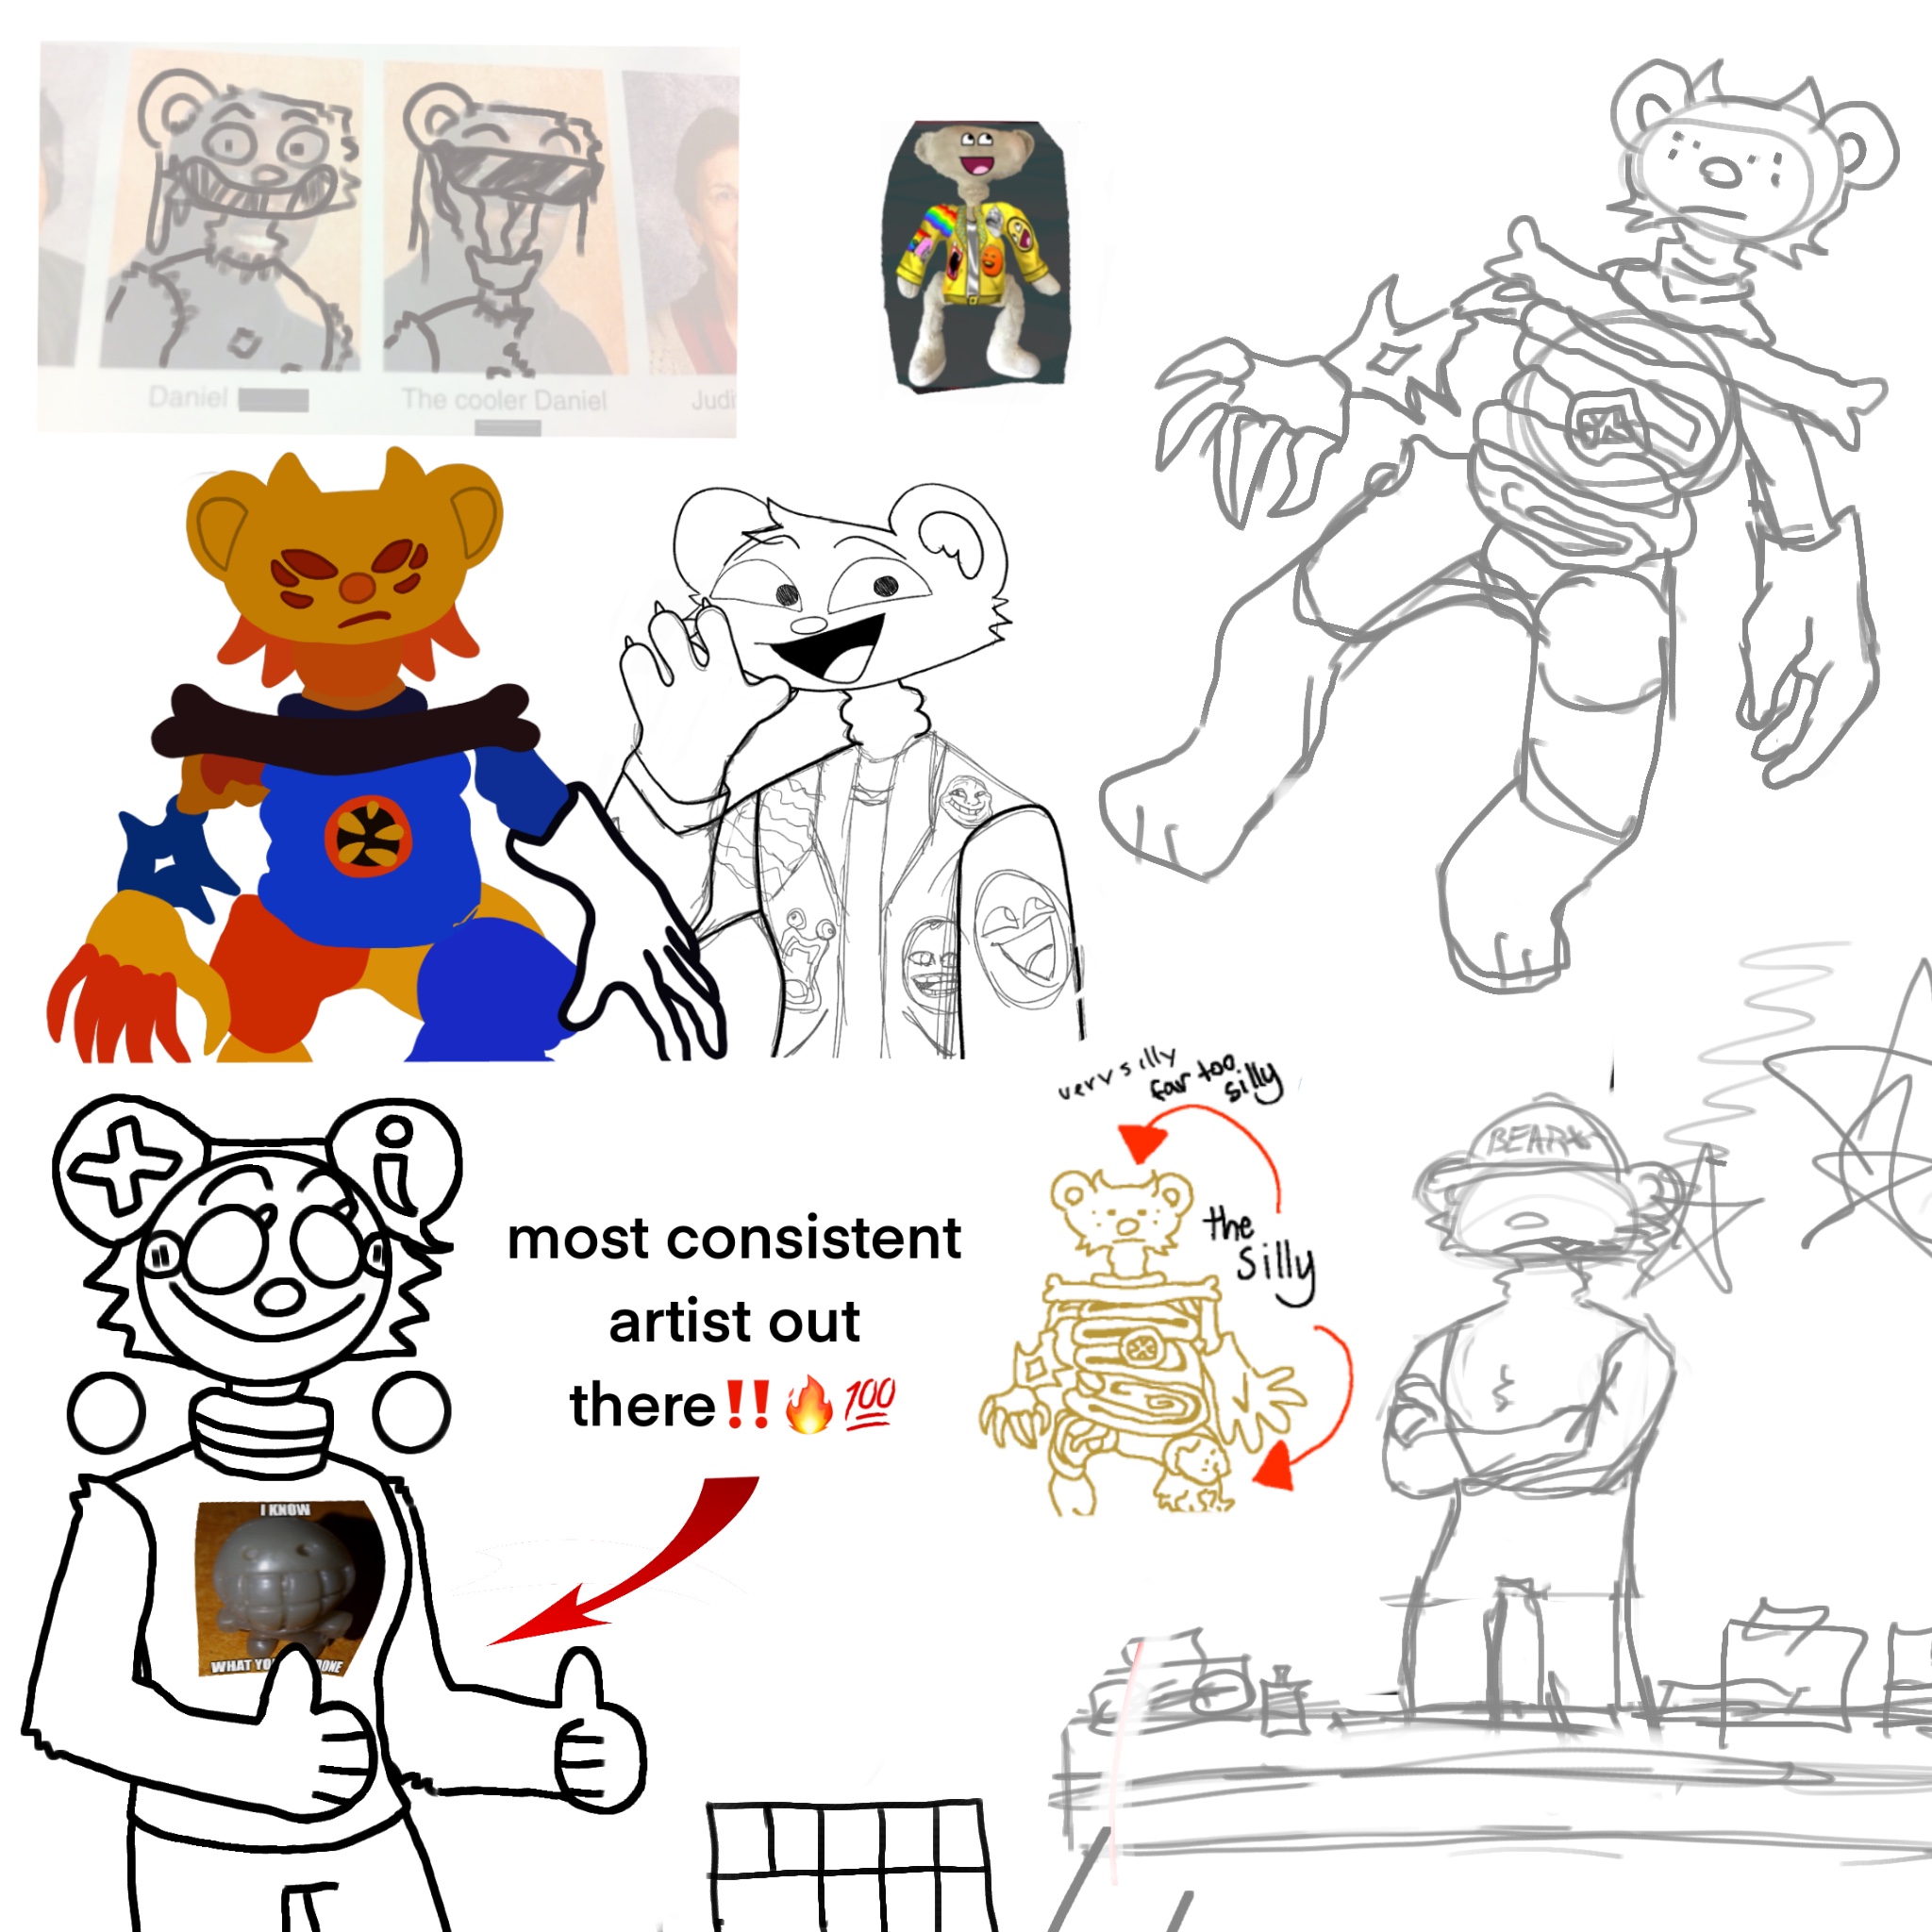 Uh- hello! Idk if this community is about only making bear skins and such  but heres some bear fanart i made!- : r/RobloxCheedamanBear